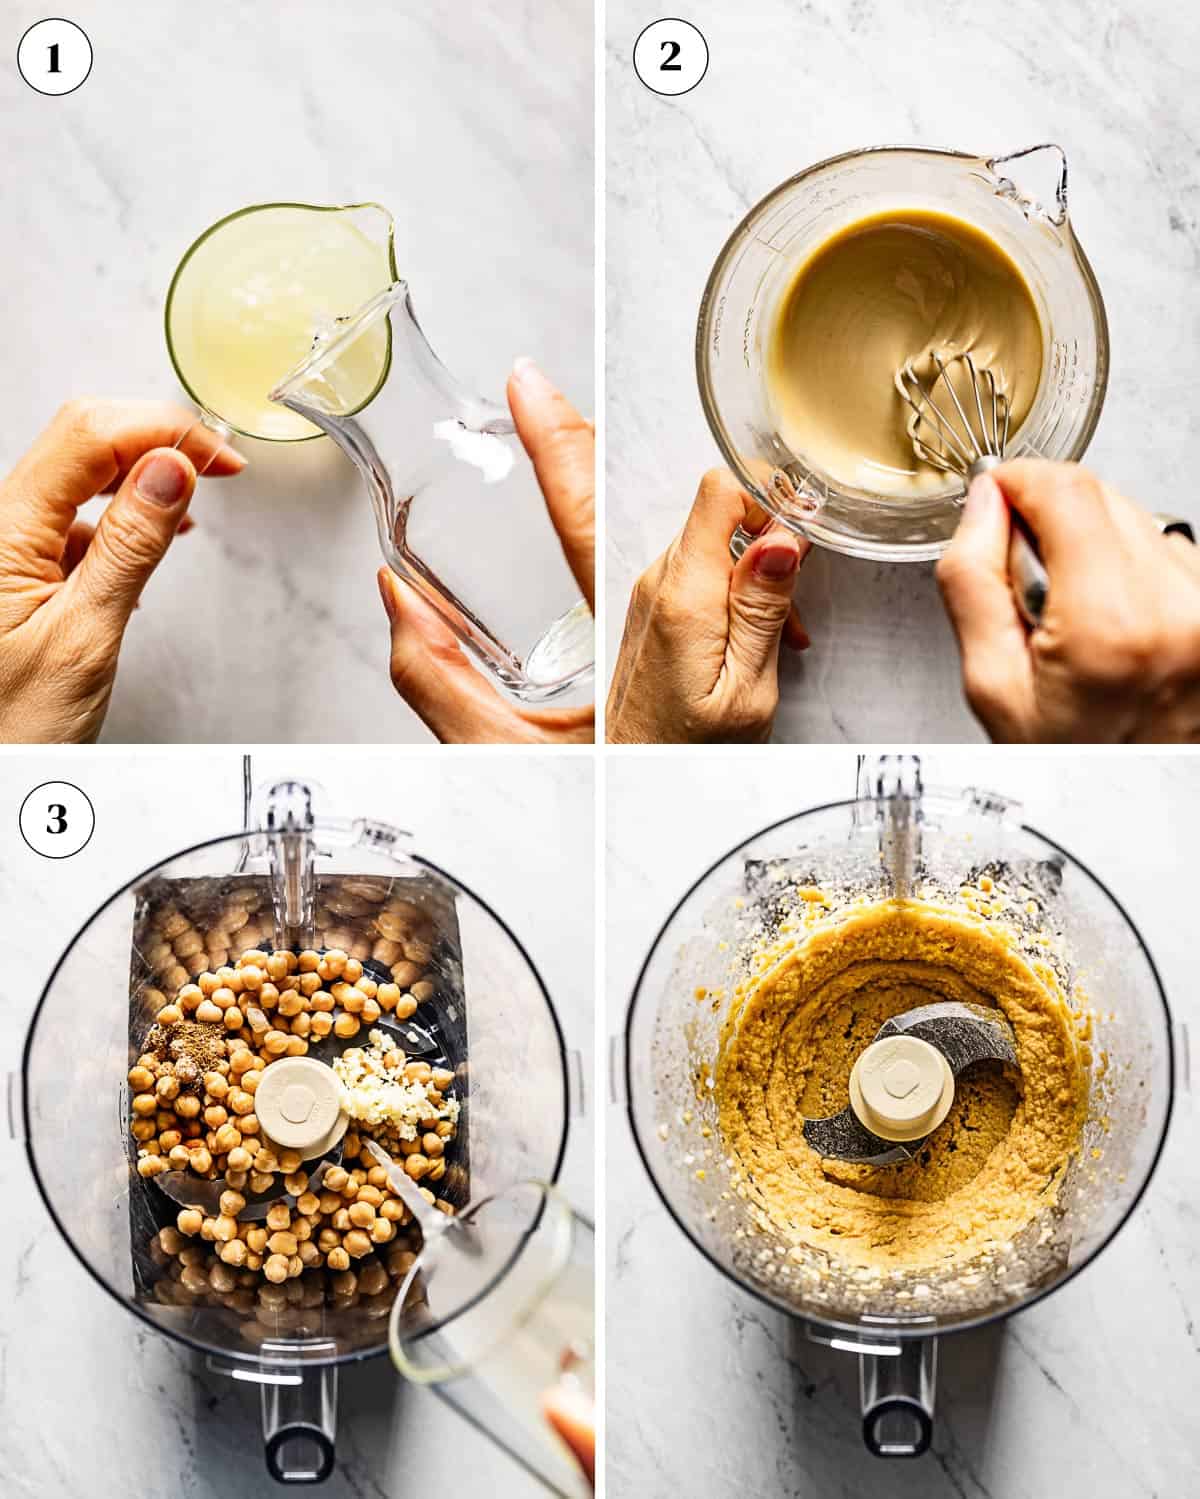 Step by step photos showing how to make hummus recipe.